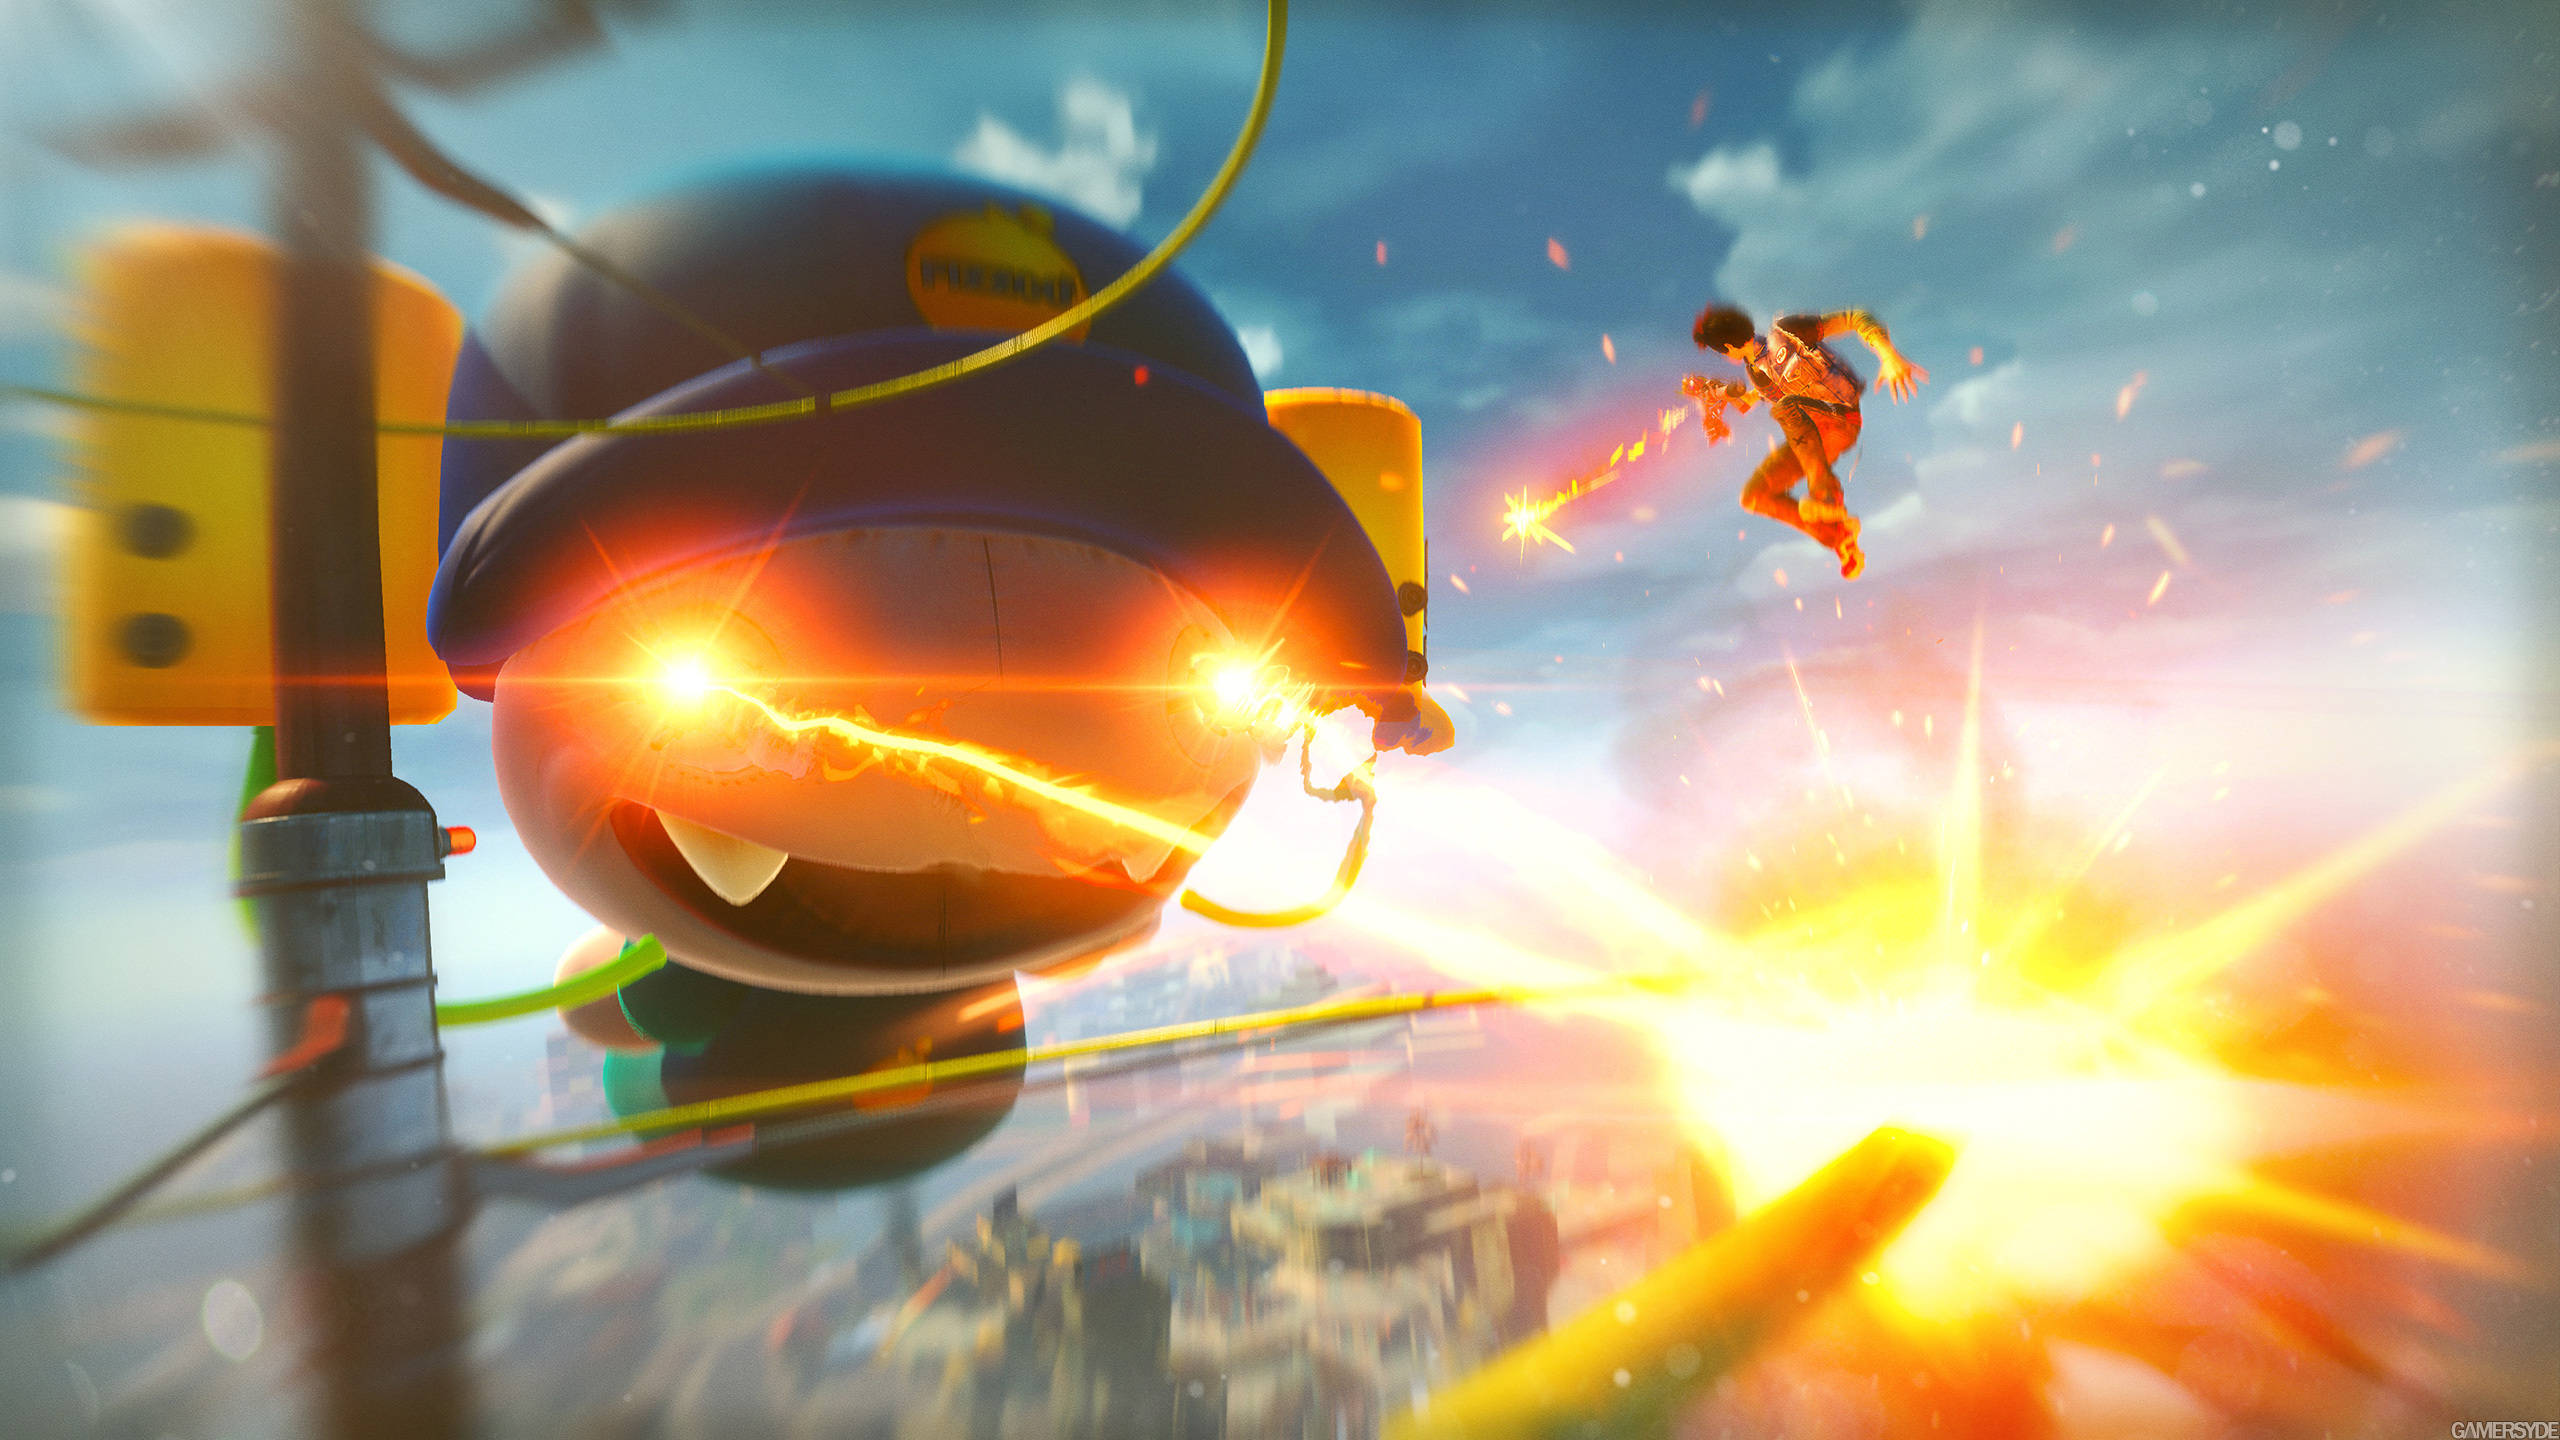 TGS: Sunset Overdrive gameplay - Gamersyde